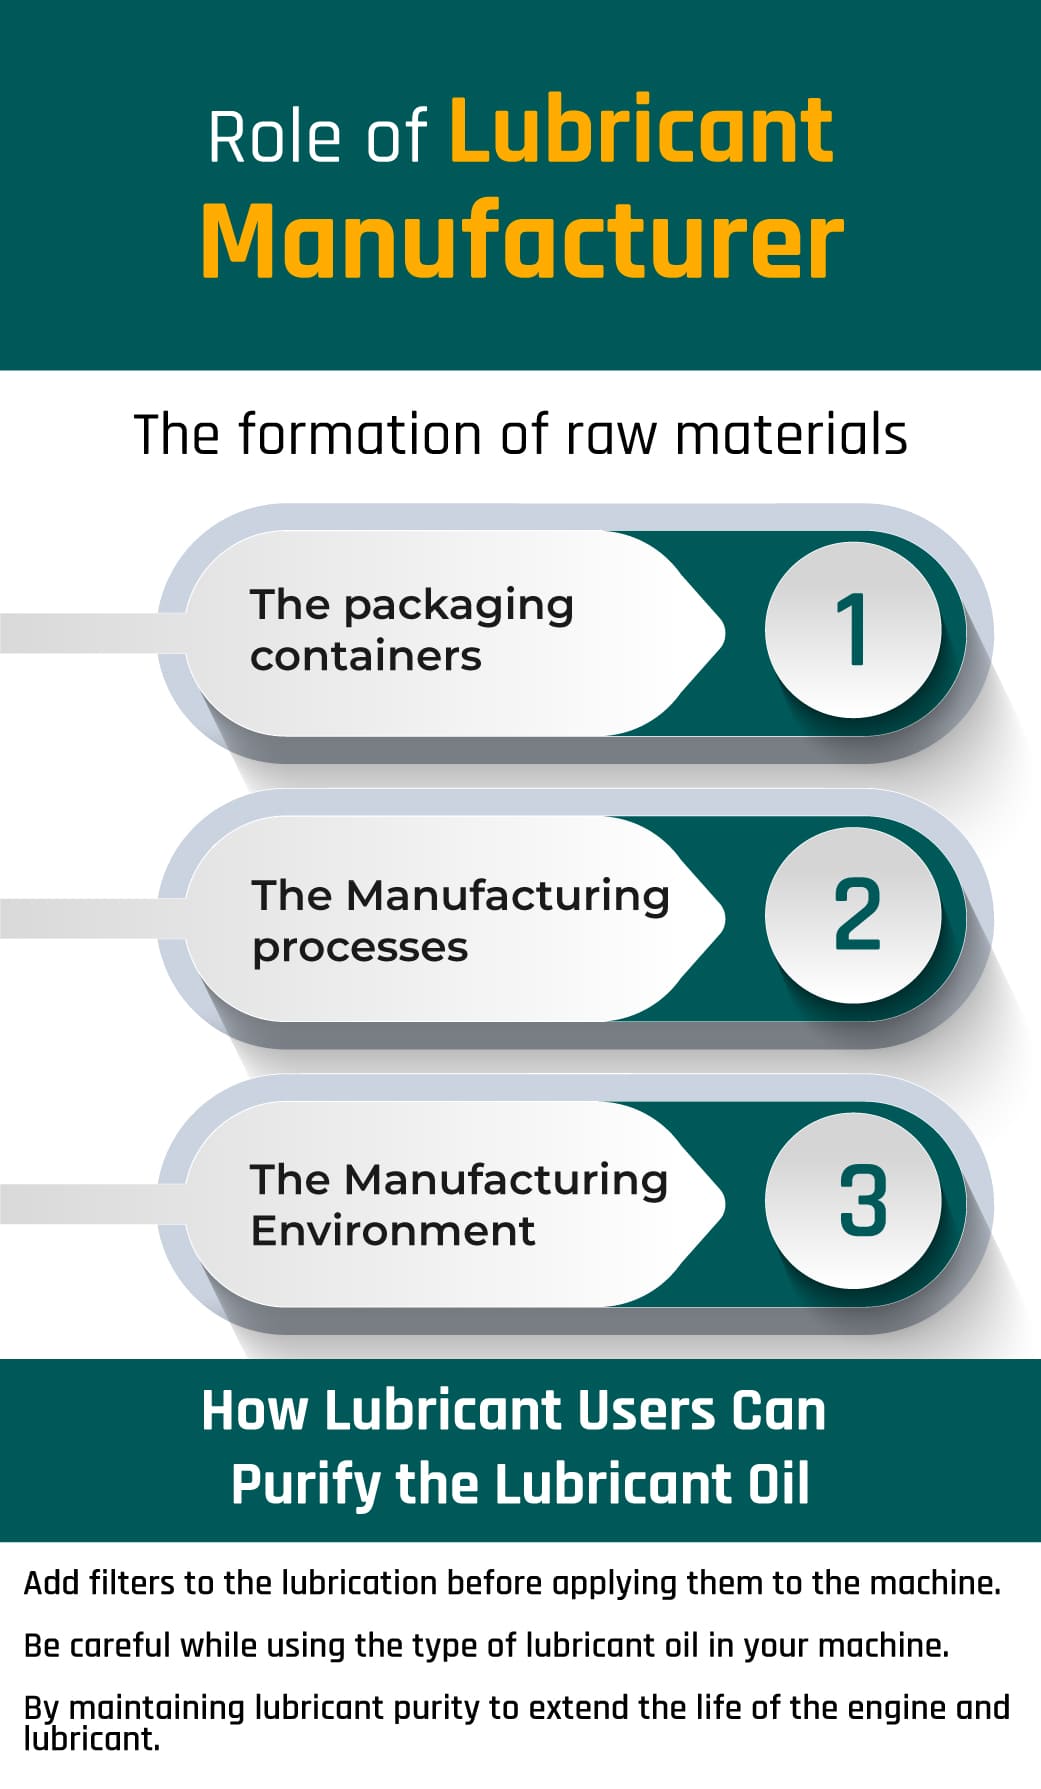 Armor Lubricants guidelines on how lubricant users can purify the lubricant oil